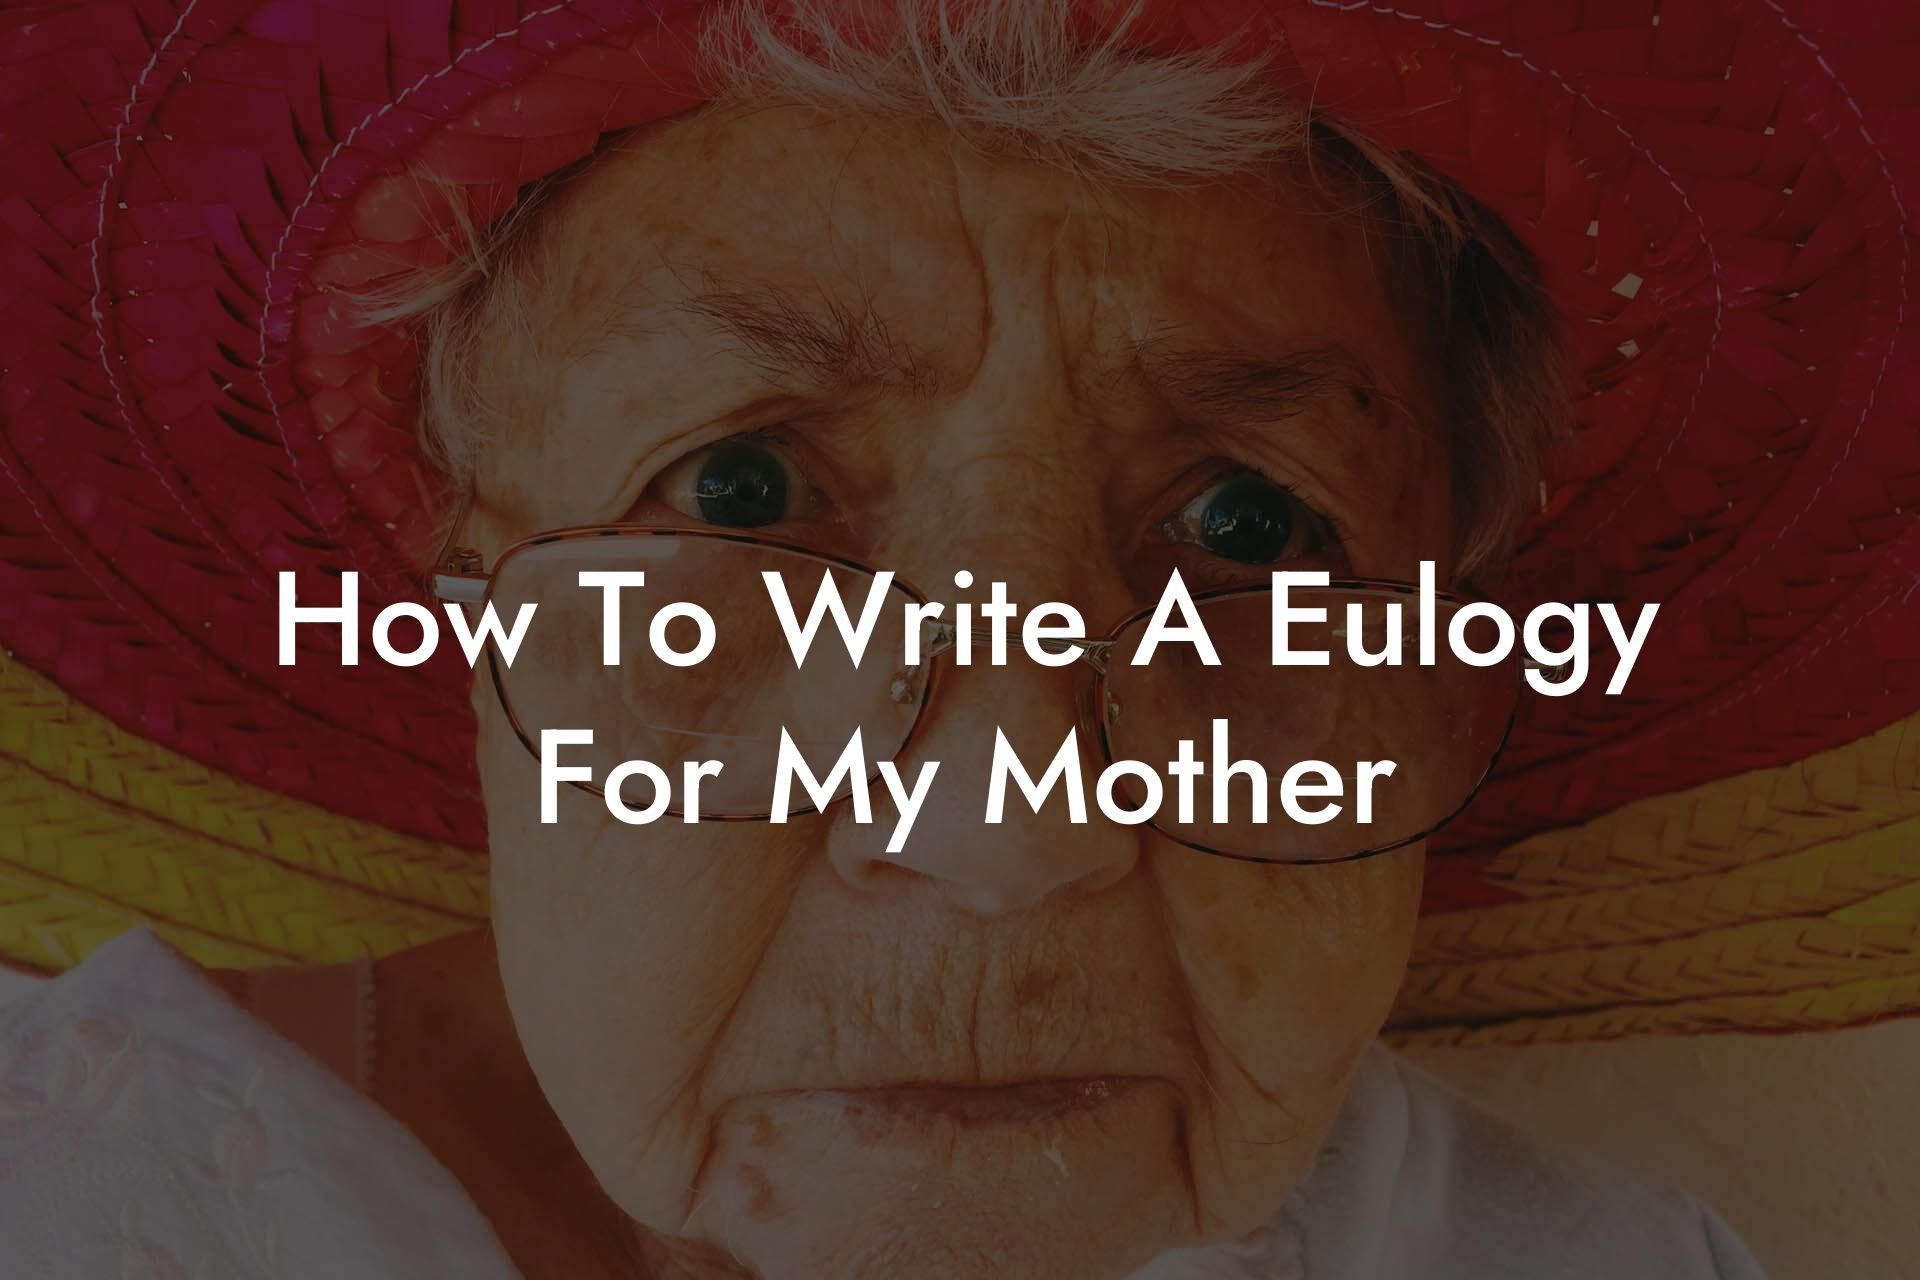 How To Write A Eulogy For My Mother